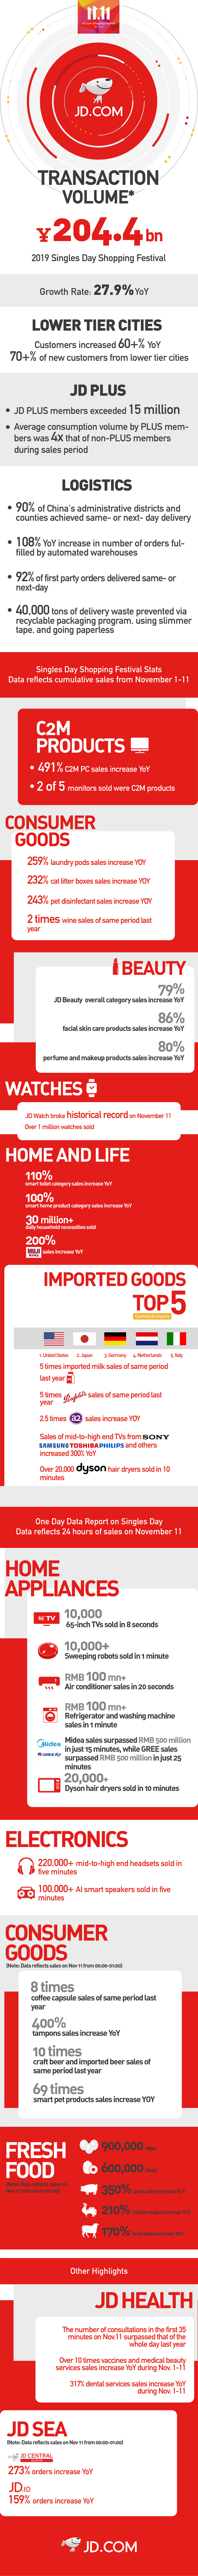 2019 Singles Day Shopping Festival,an infographic with highlights from the sales period